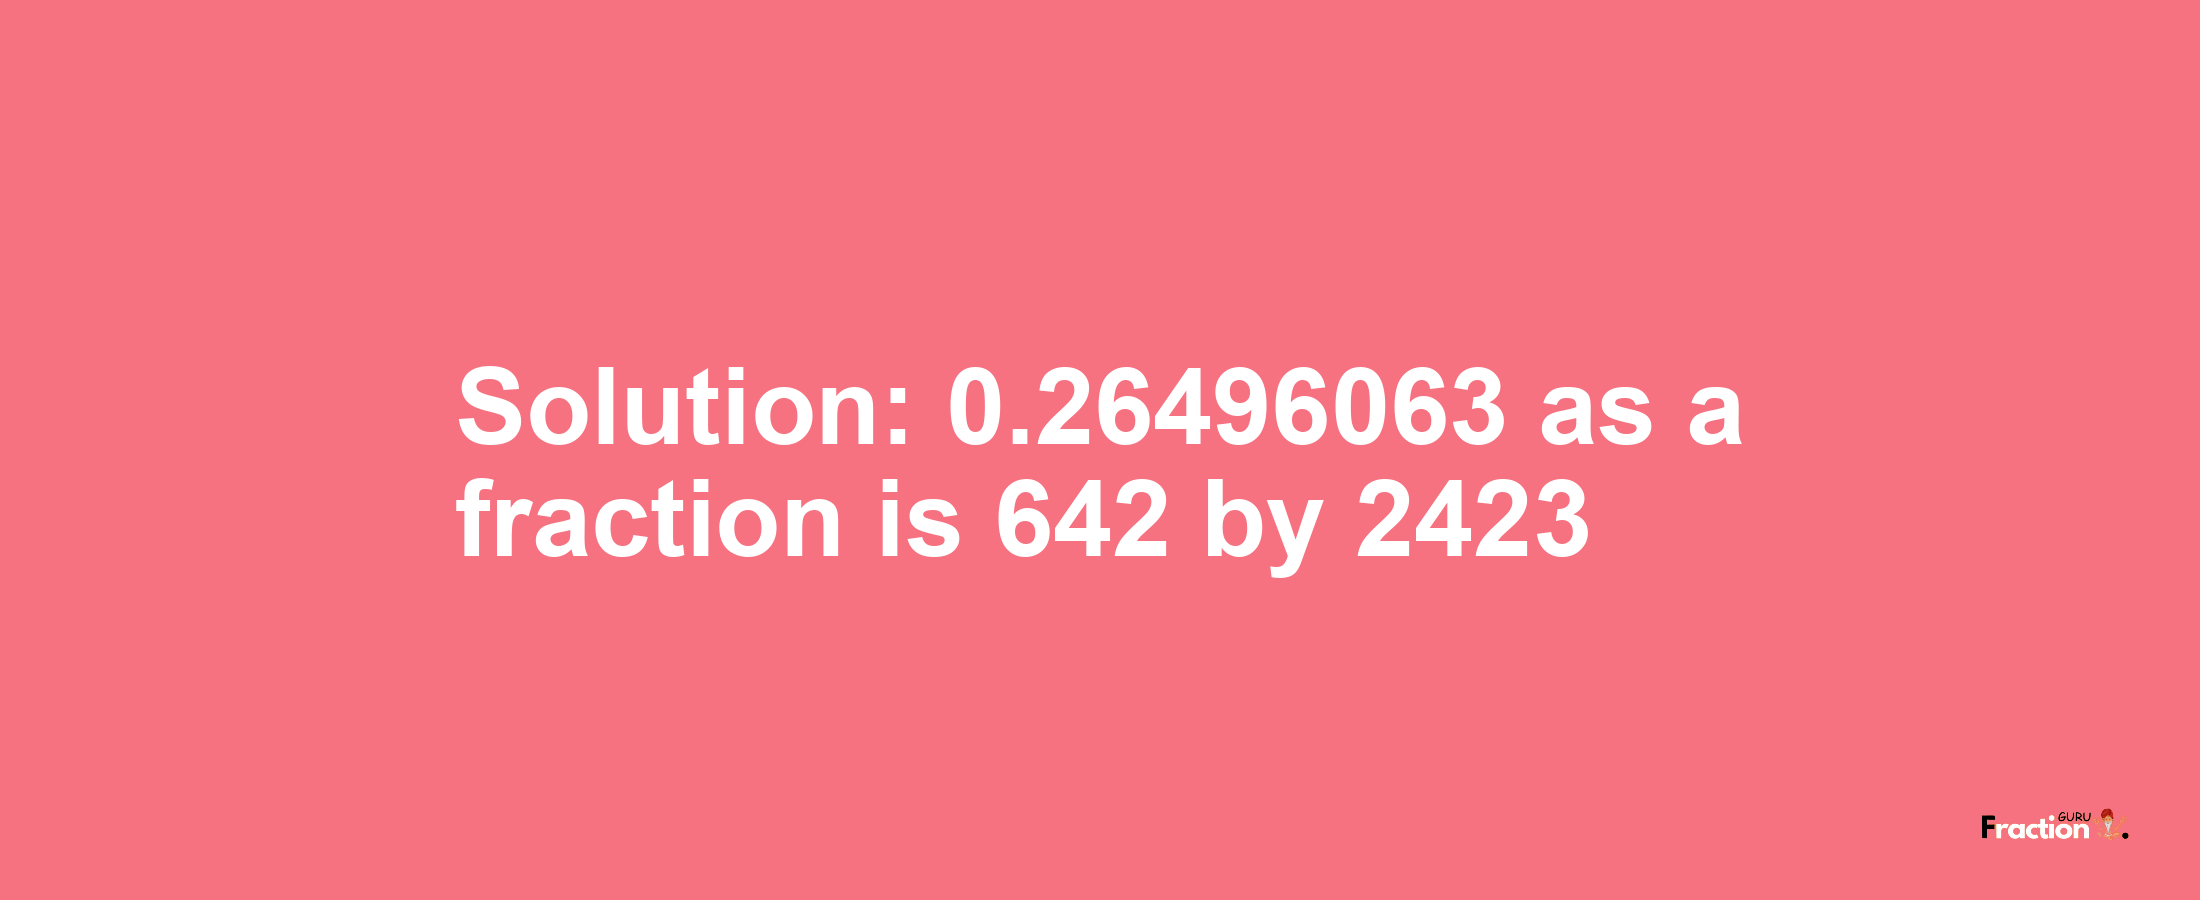 Solution:0.26496063 as a fraction is 642/2423